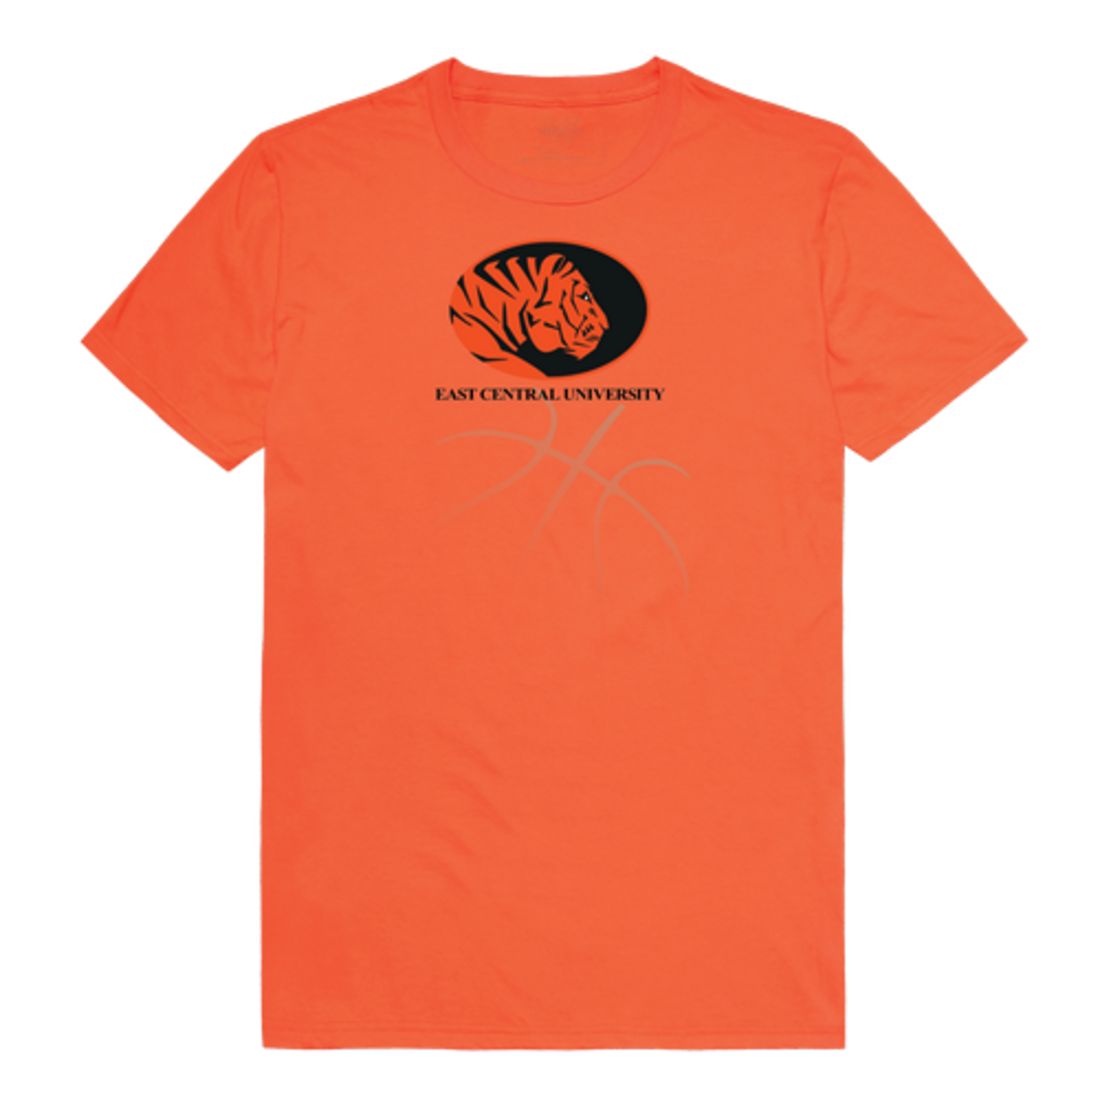 East Central University Tigers Basketball T-Shirt Tee